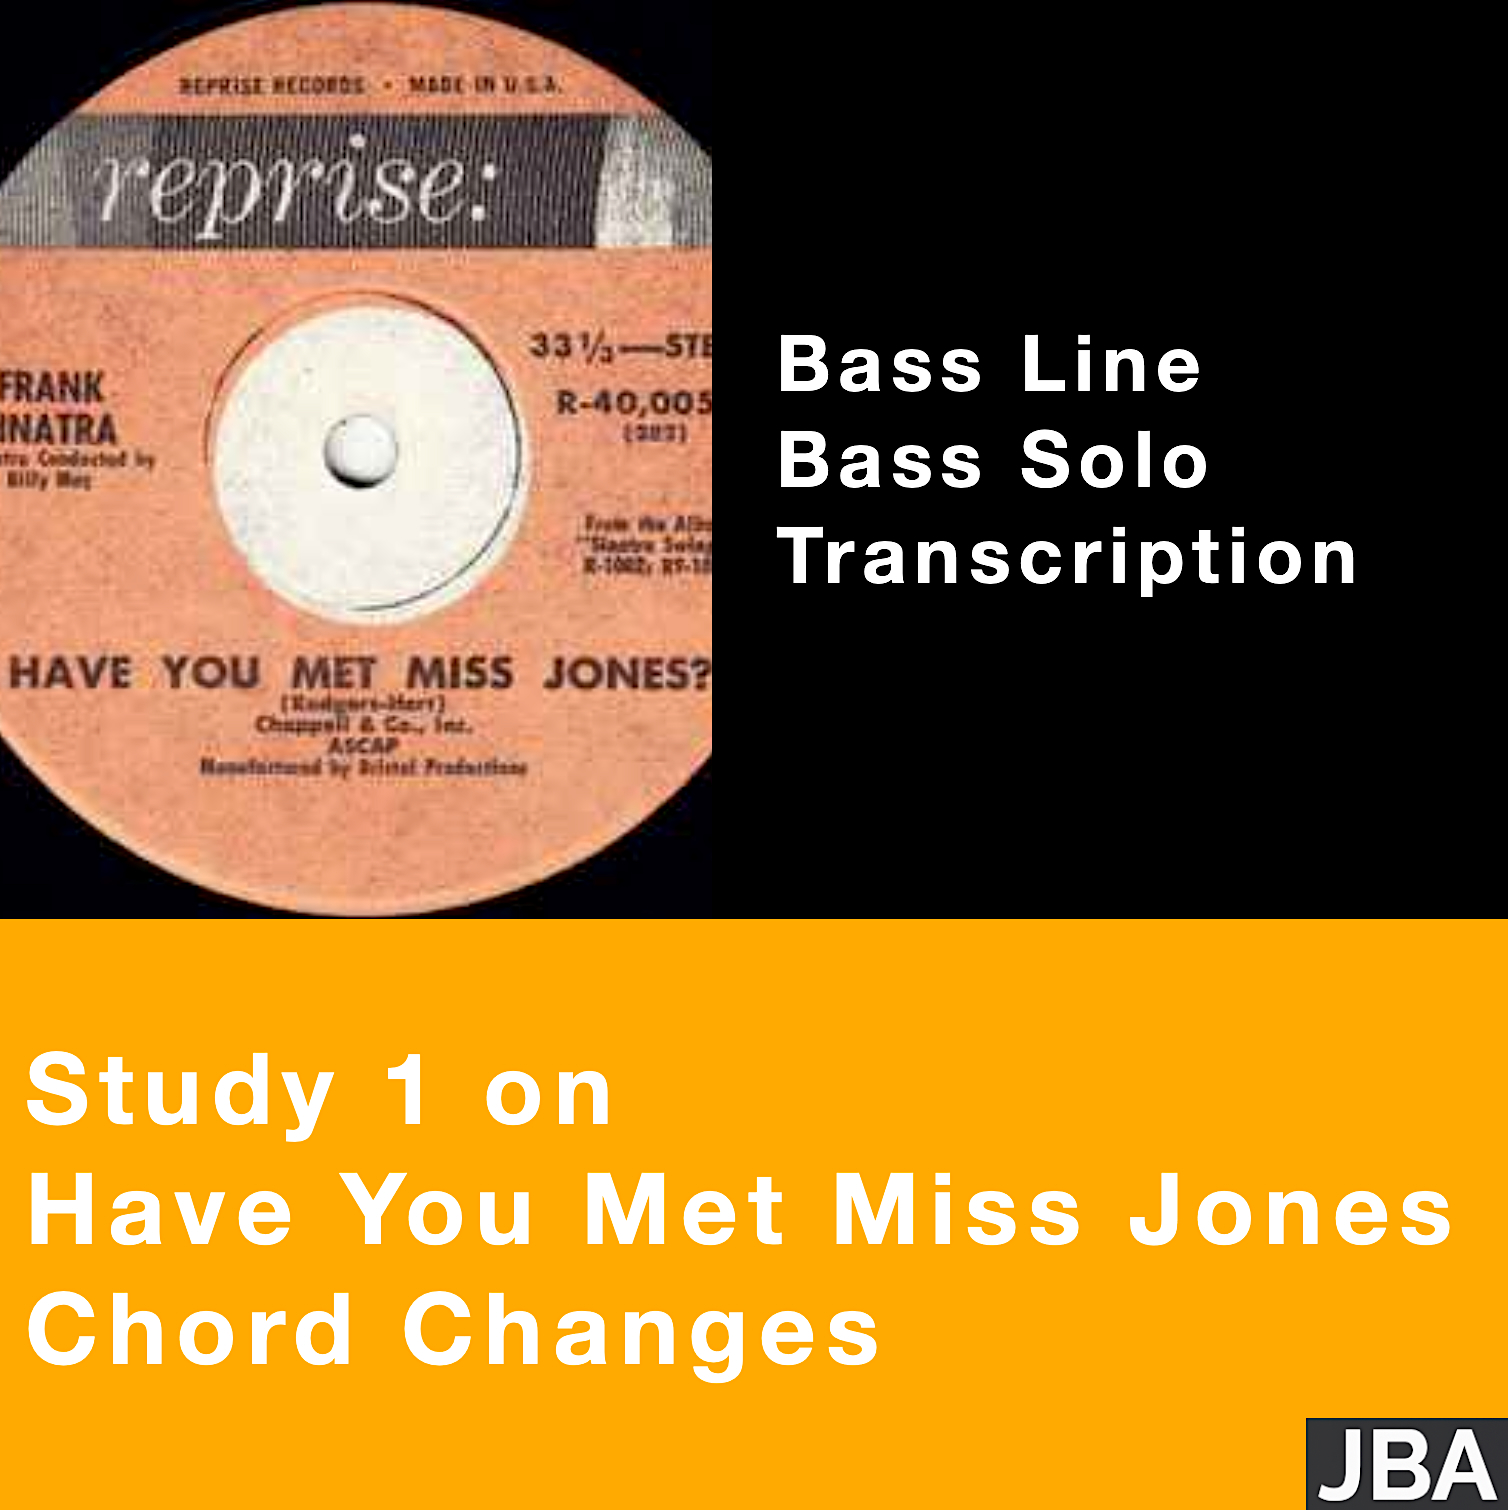 Study  1 on Have You Met Miss Jones chord changes